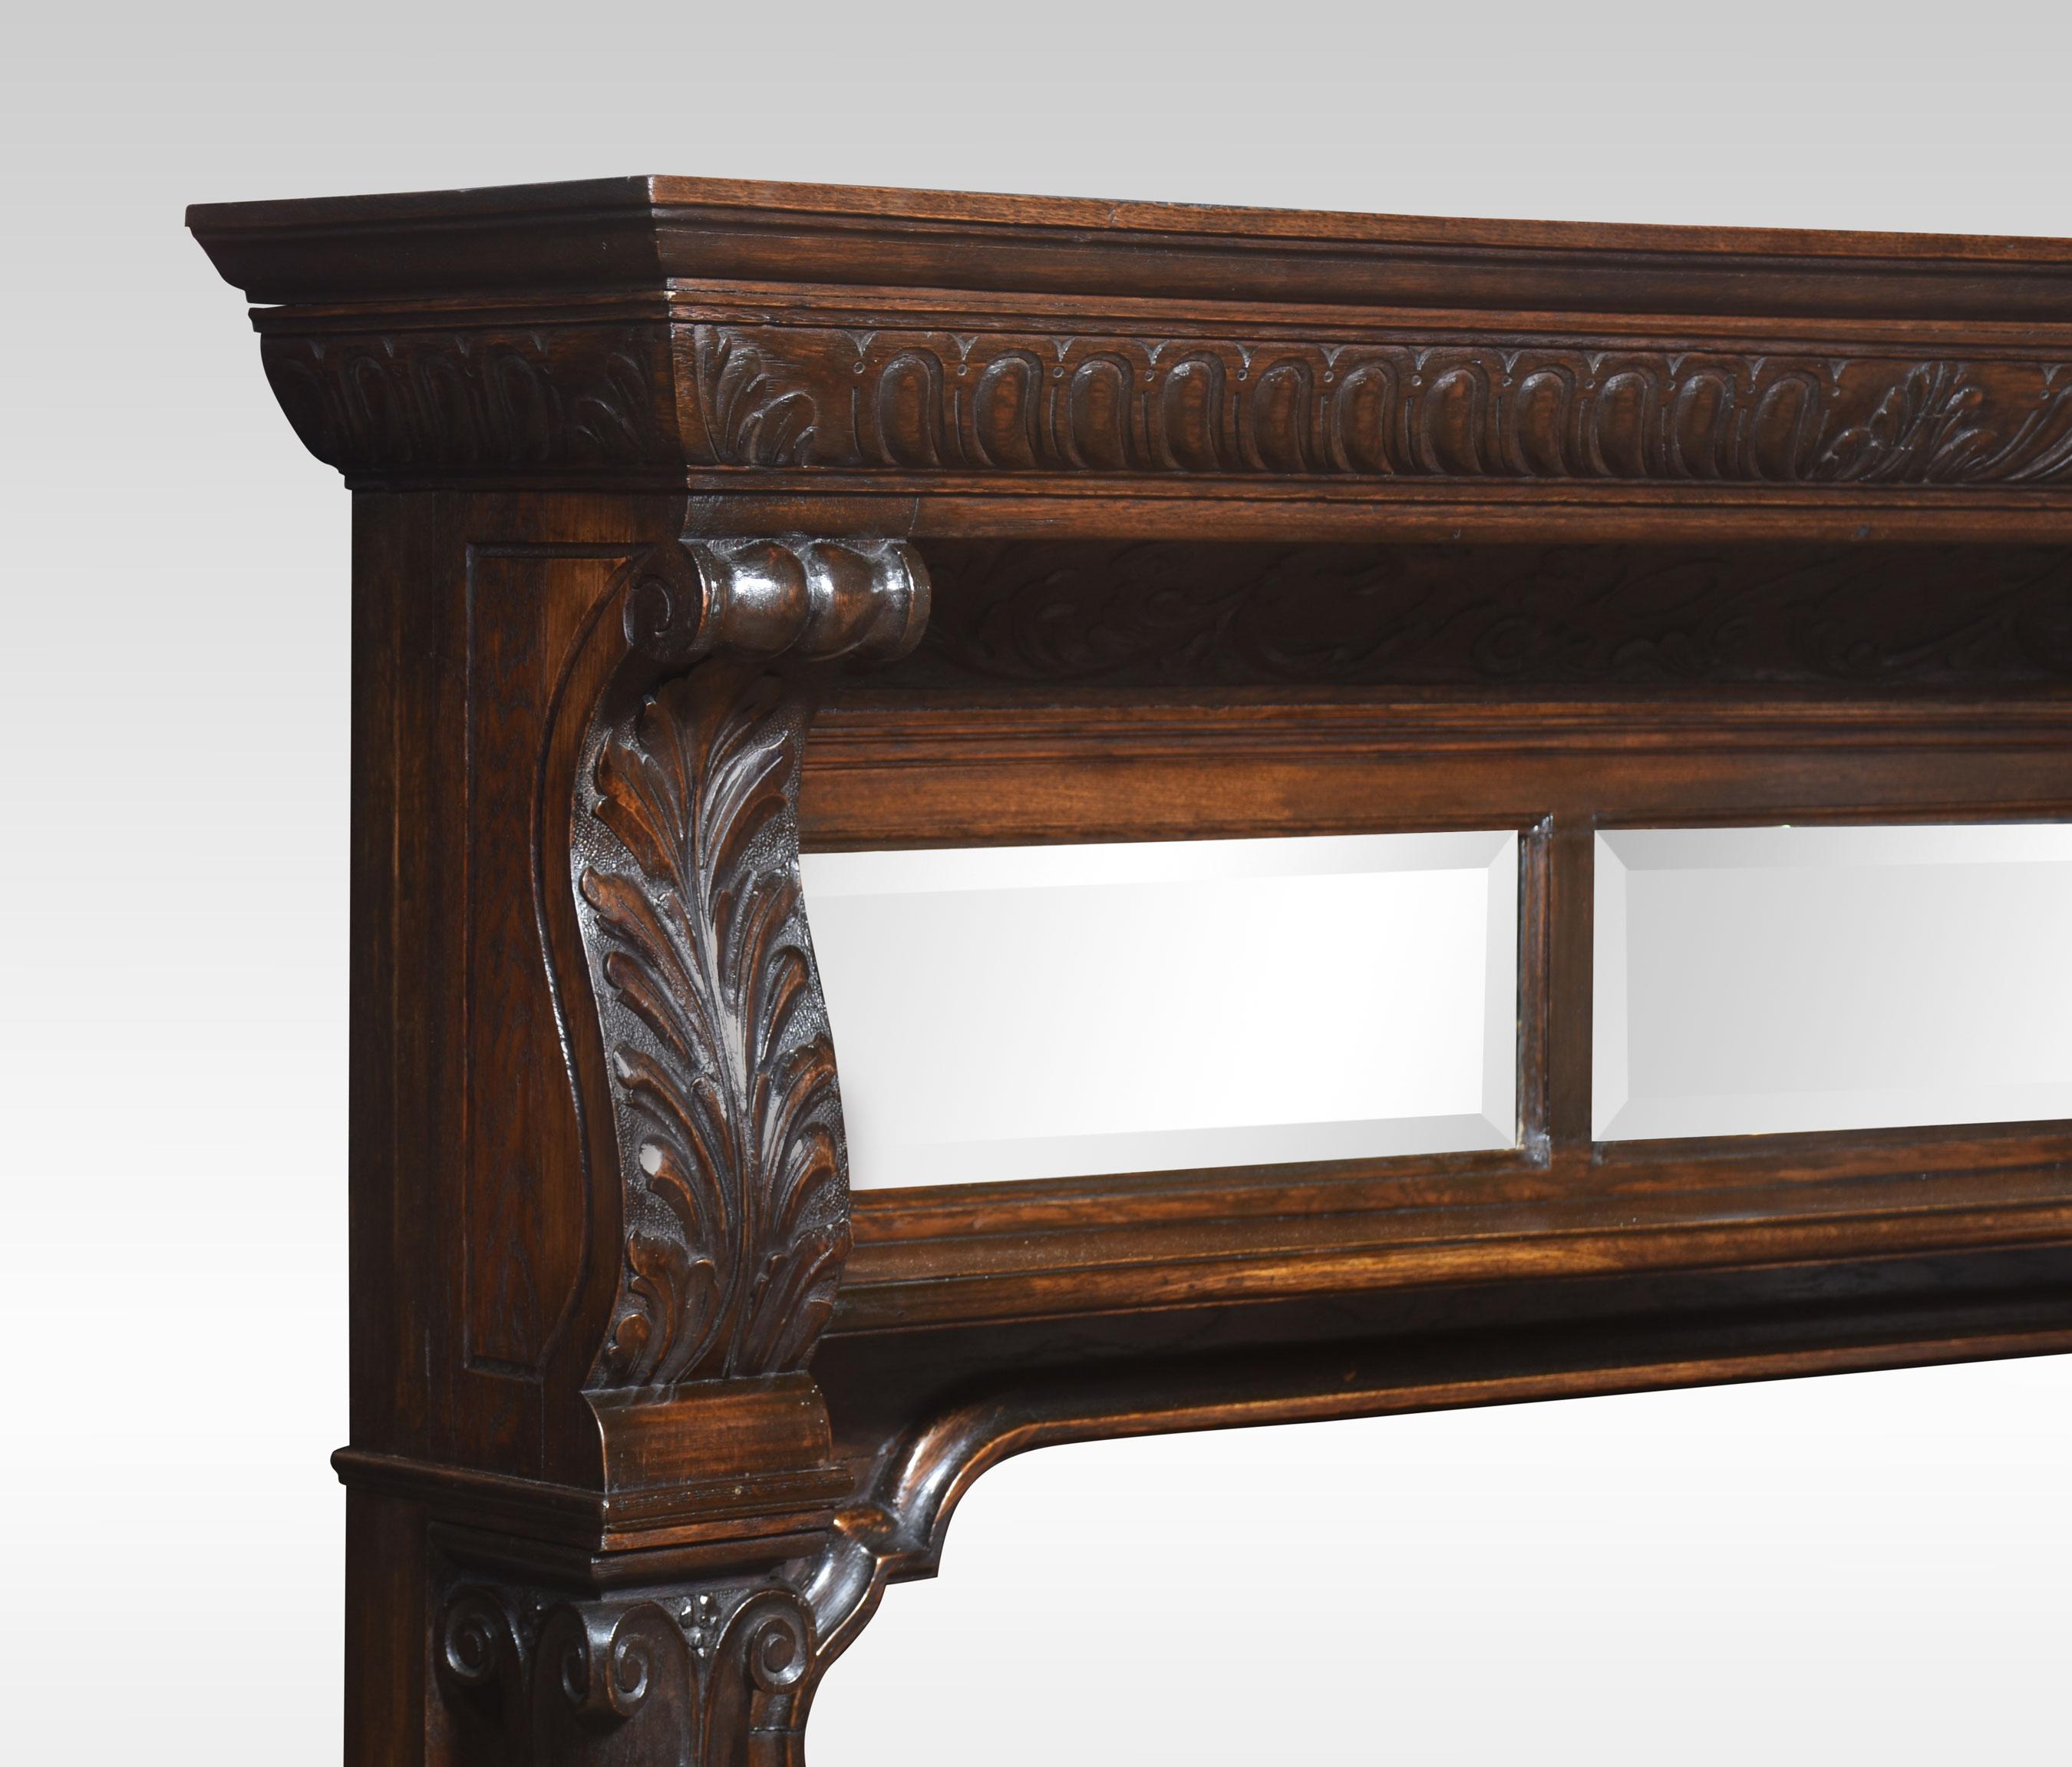 Carved oak fire surround, the rectangular mantle above carved detail. to the acanthus capitals flanking two original bevelled mirrors. Supposed on bold reeded carved pillars.
Dimensions
Height 62.5 Inches
Width 63.5 Inches
Depth 13 Inches

Internal